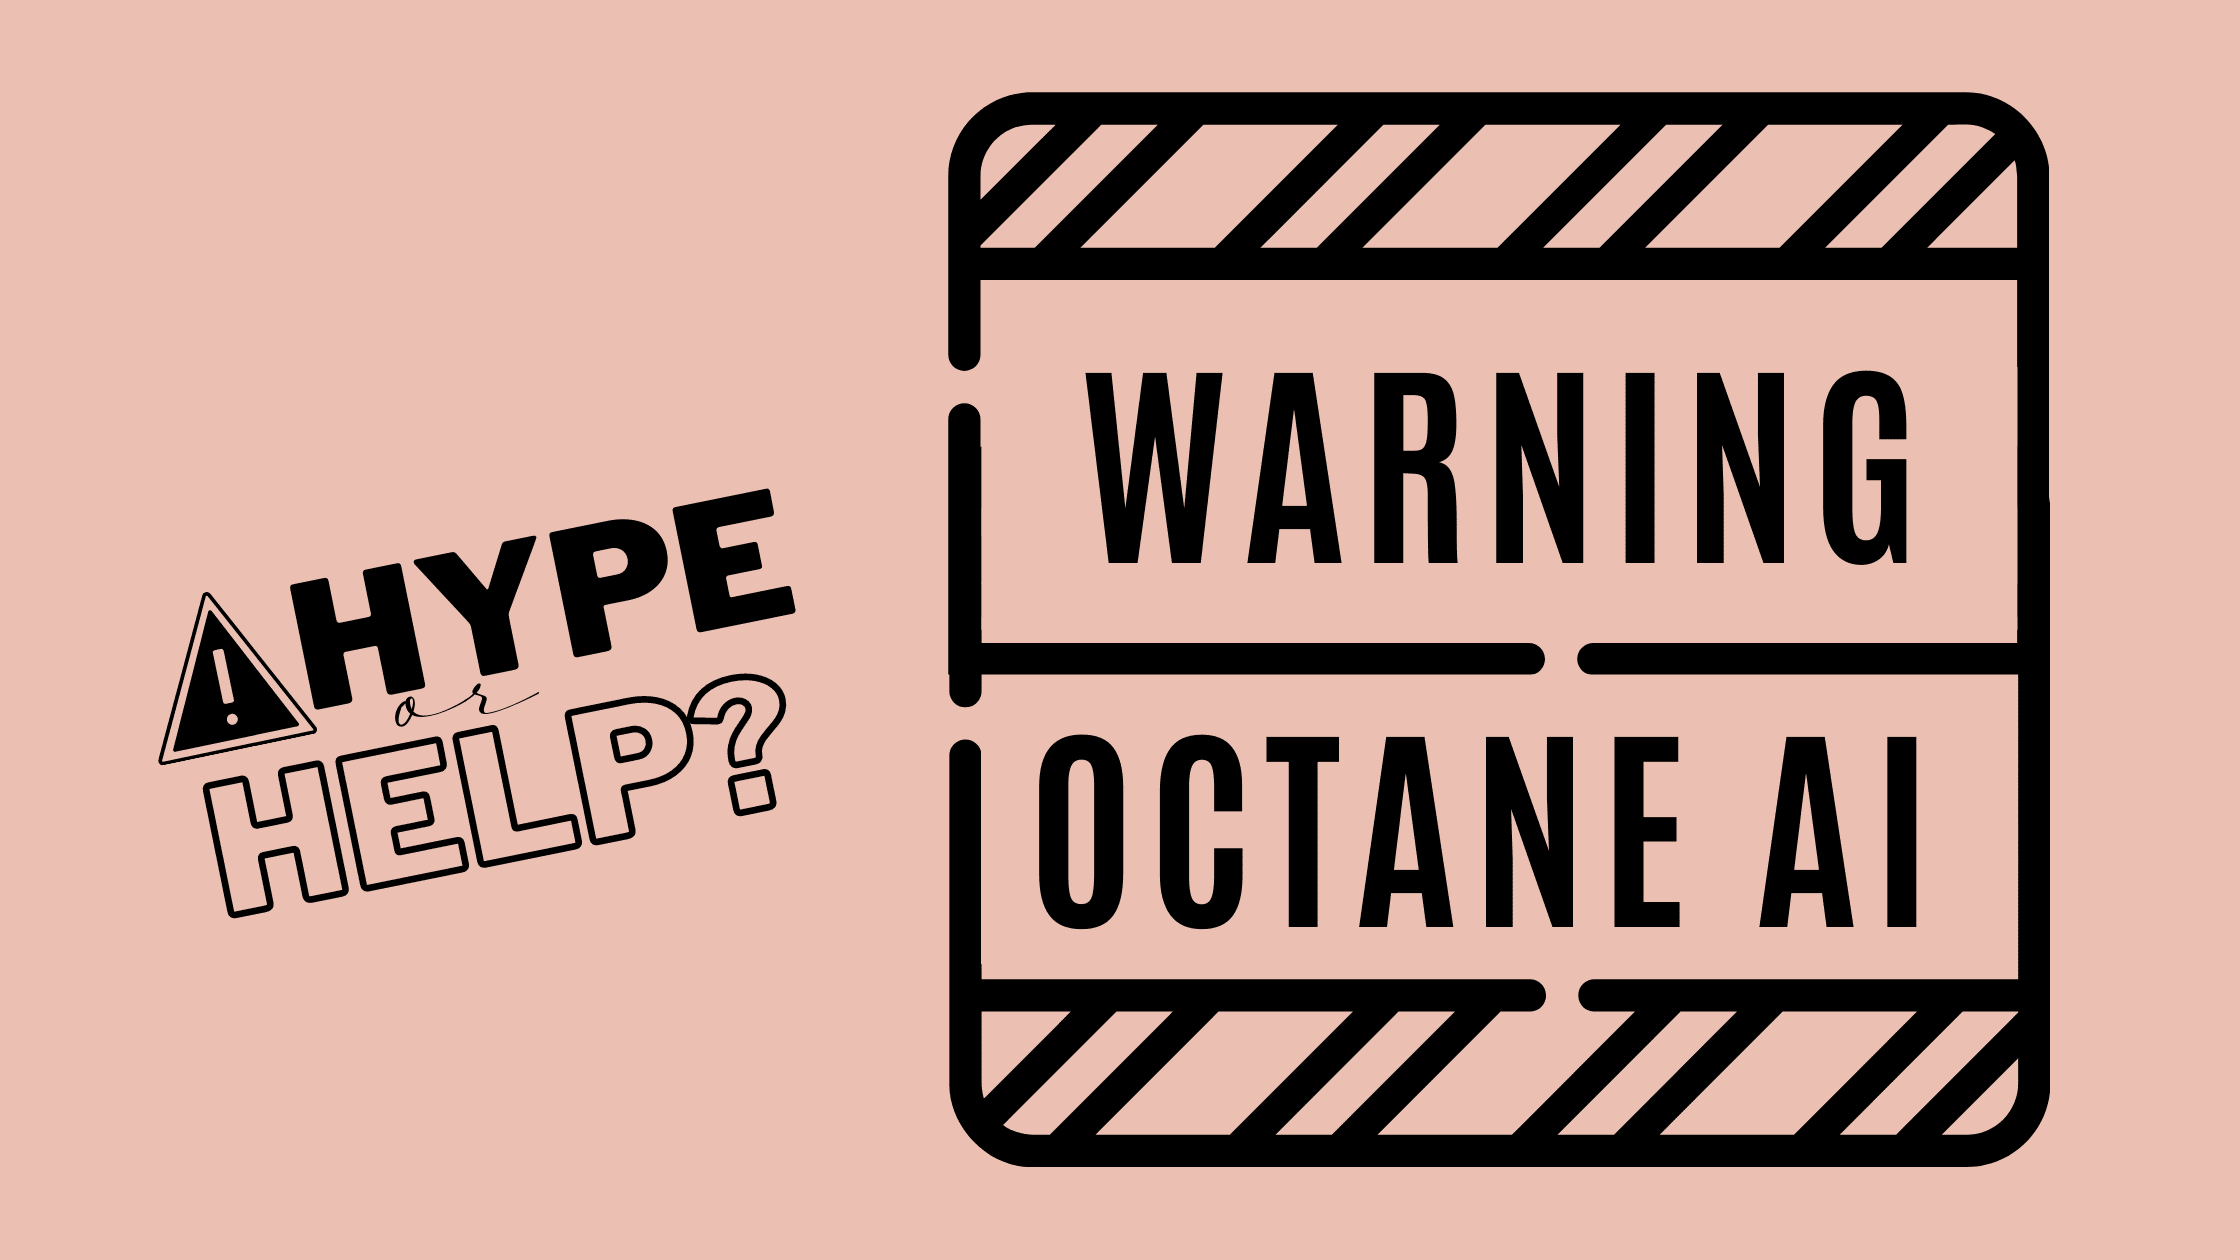 Octane AI: Is It All Hype or Does It Help?